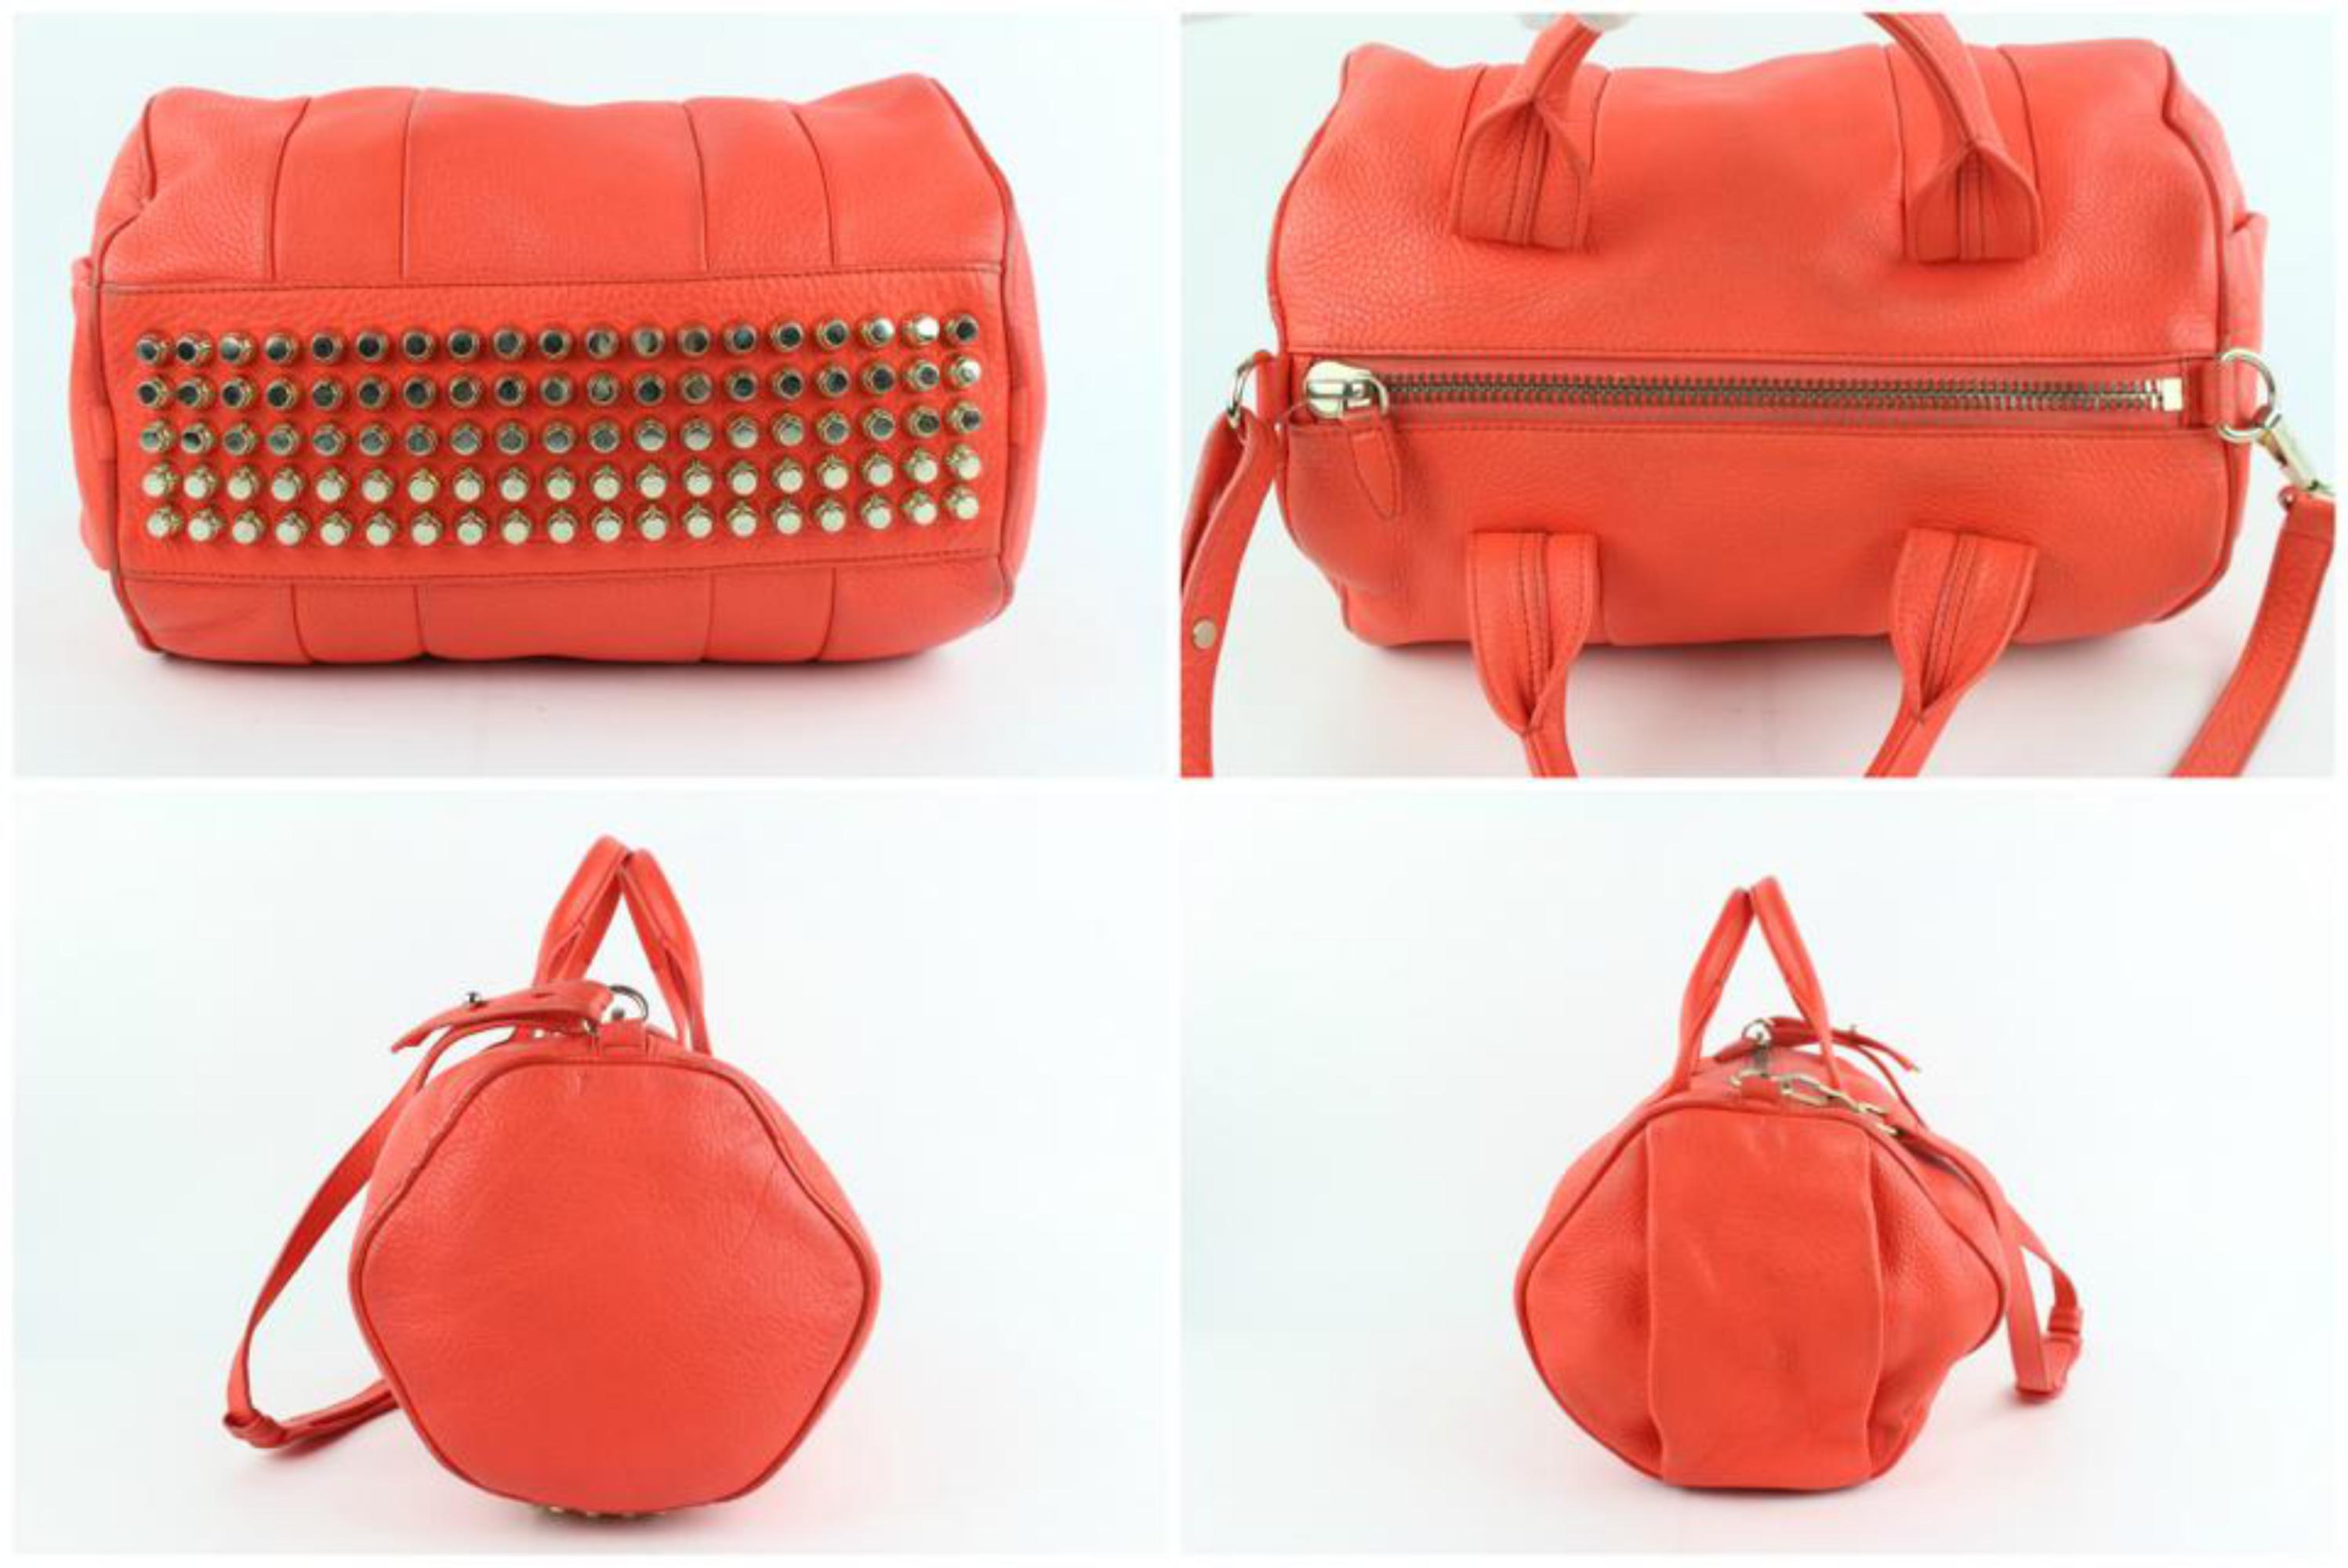 Alexander Wang Coral Pebbled Lamb Rocco 2way 9mz1025 Red Leather Shoulder Bag For Sale 5